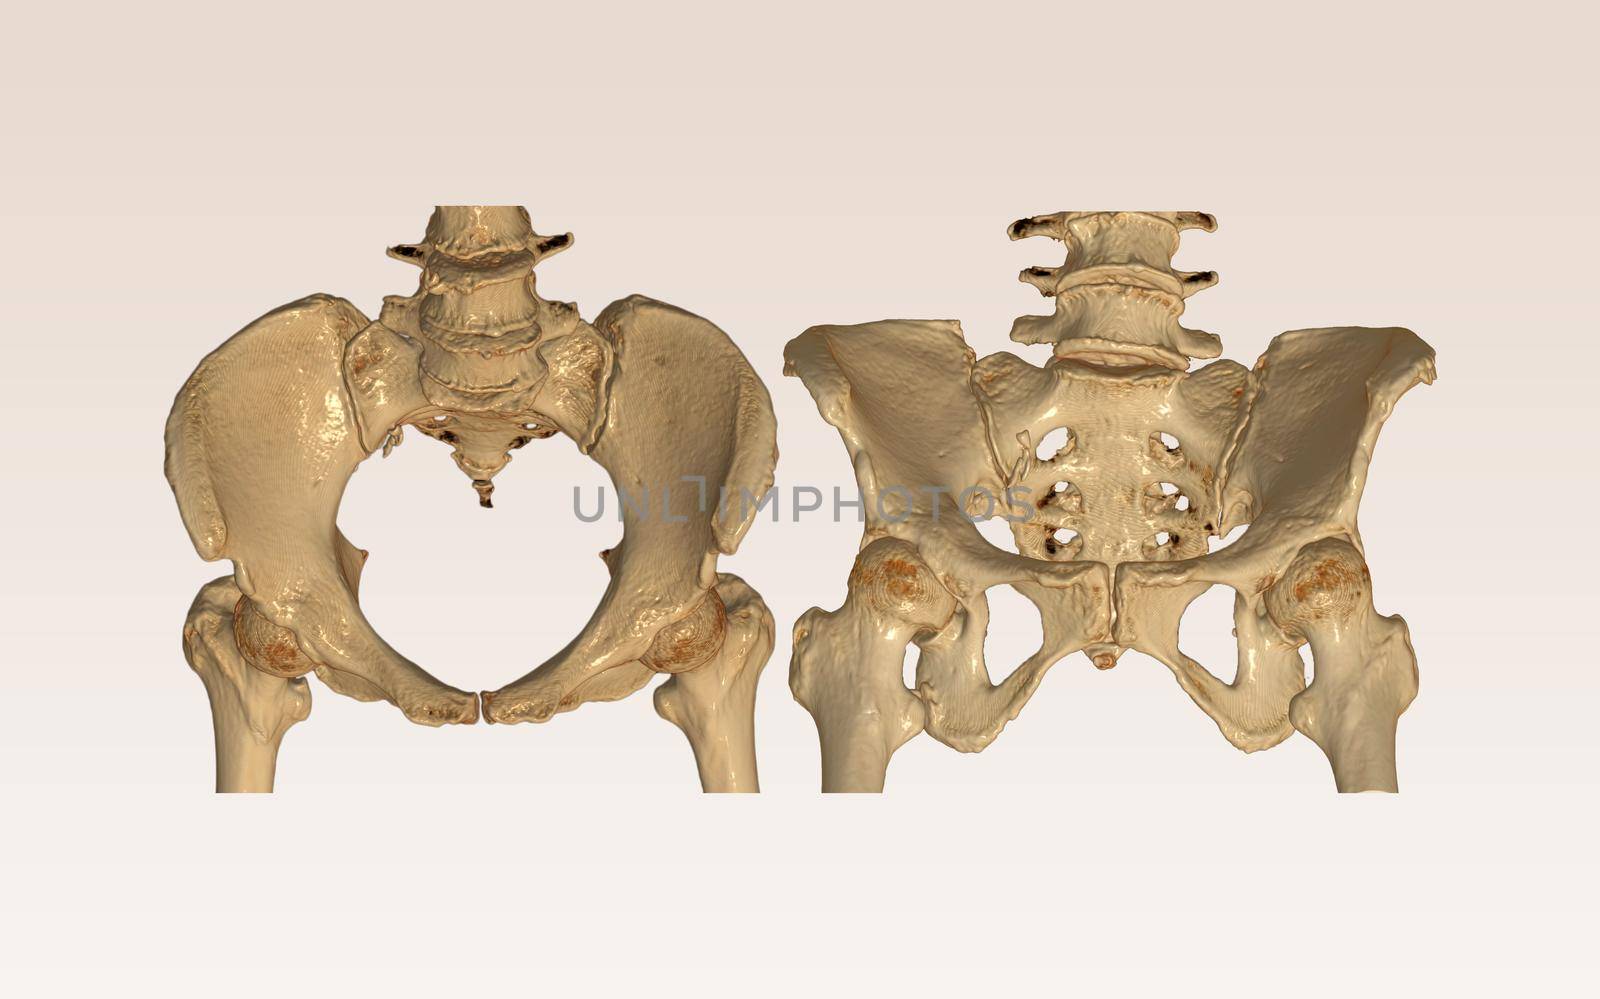 CT Scan of pelvic bone with both hip joint 3D rendering image Inlet and Outlet view . by samunella